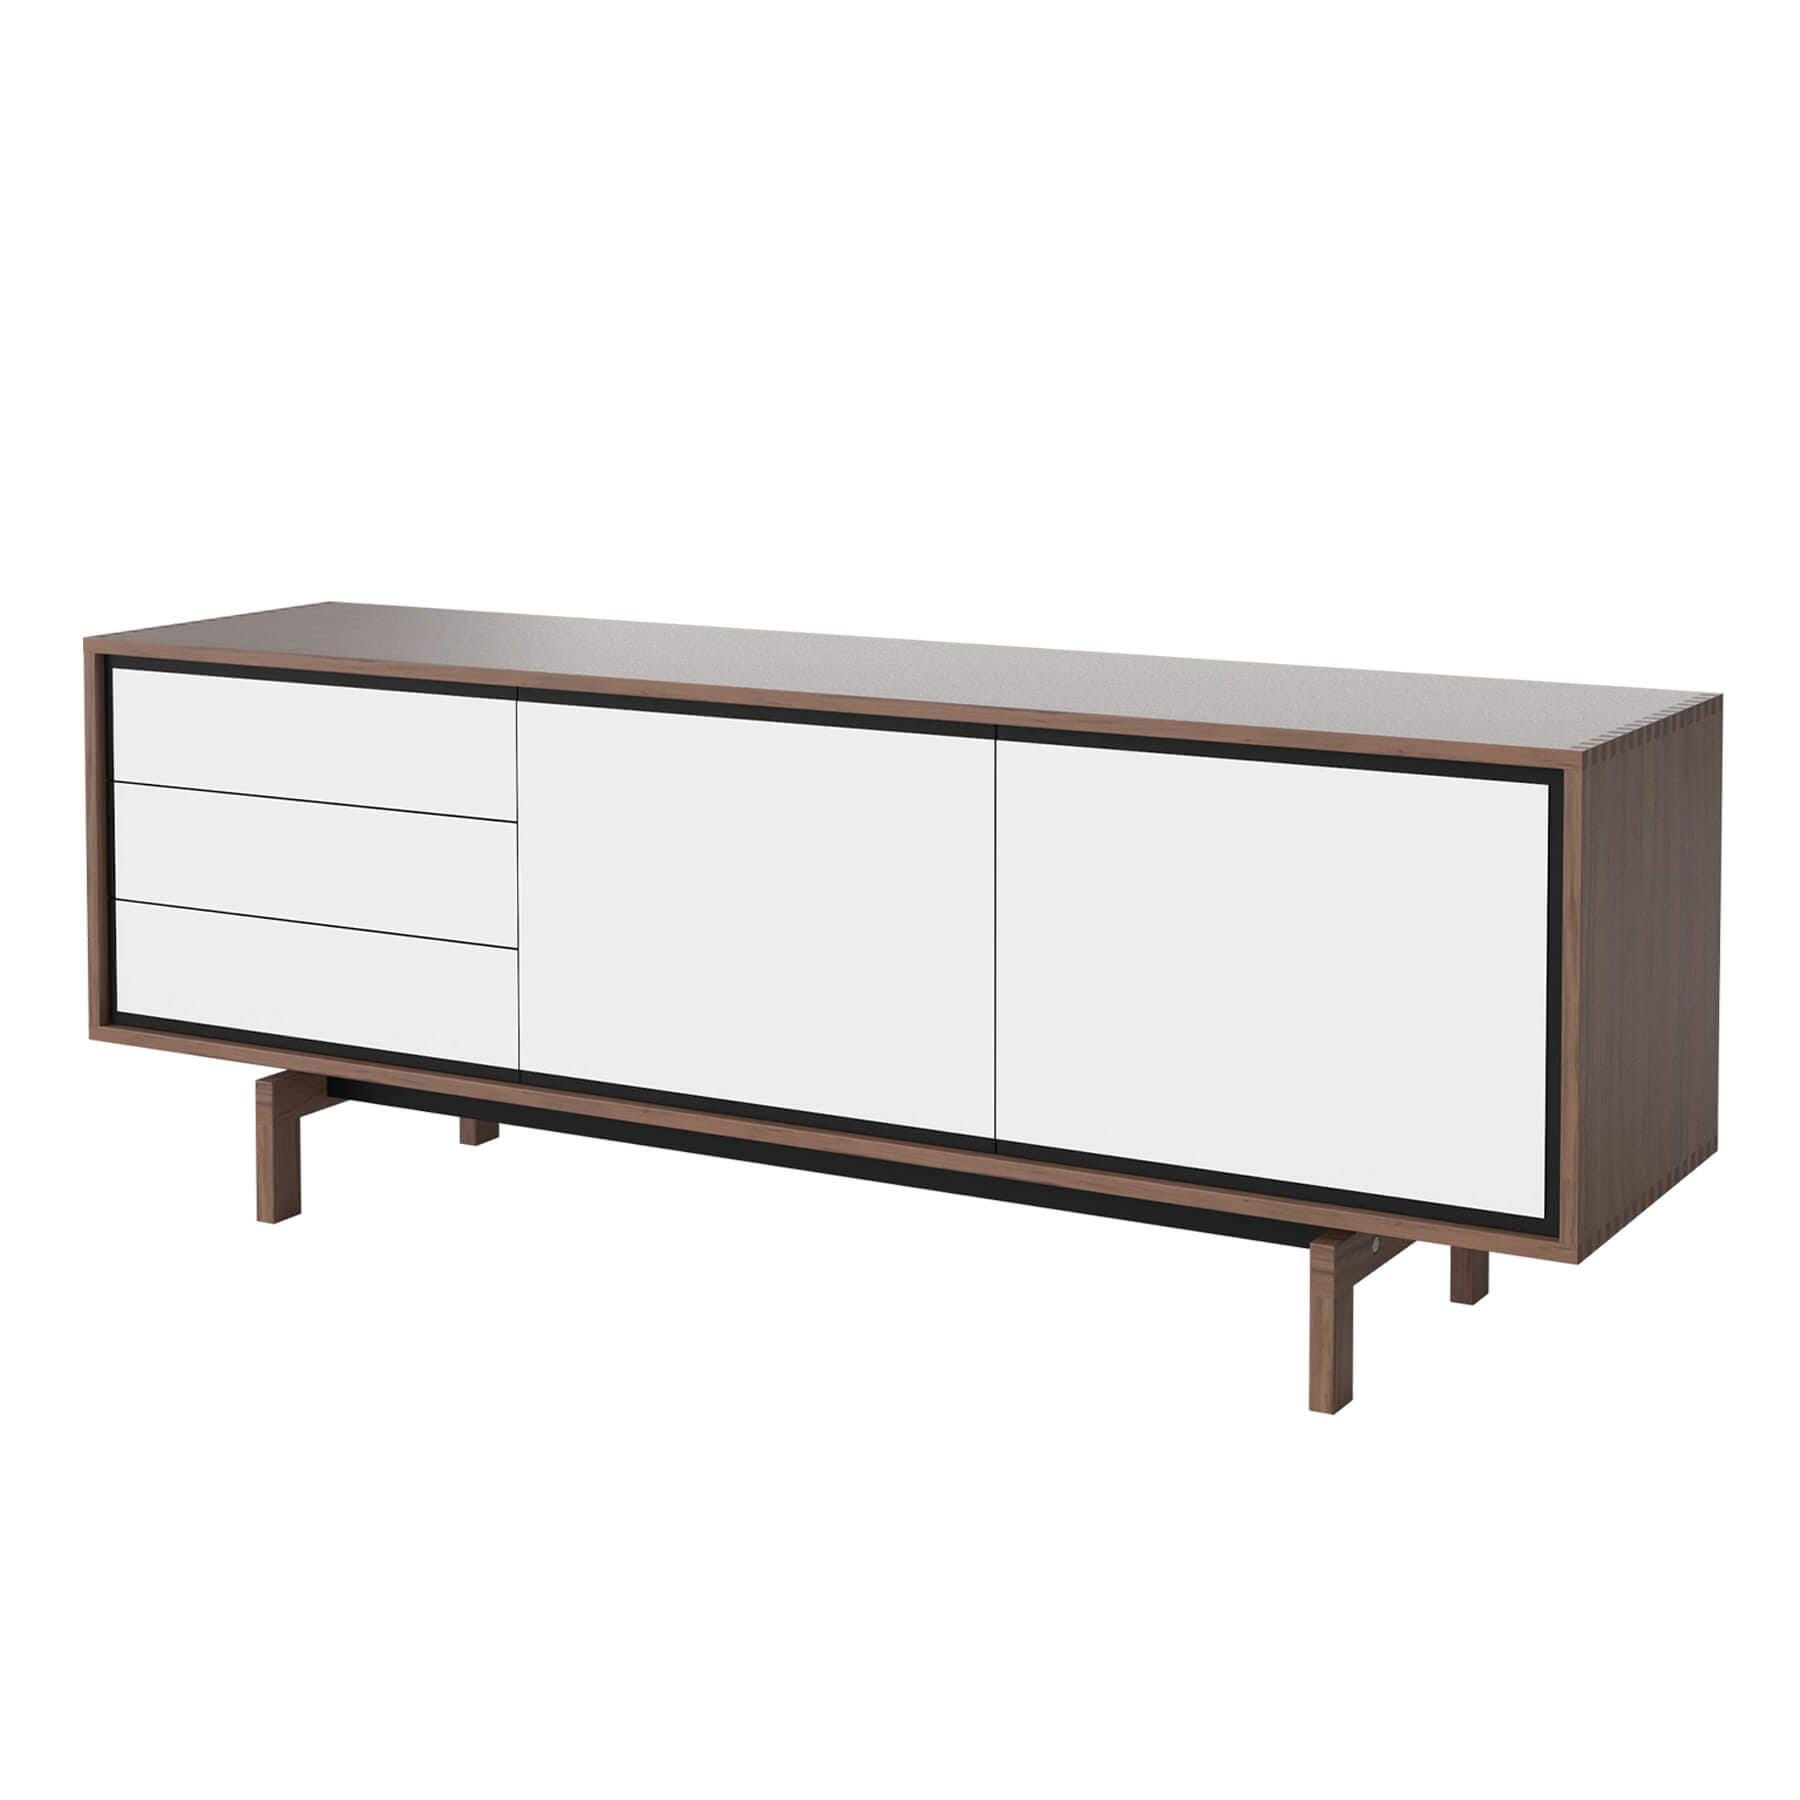 Bolia Floow Sideboard Large Oiled Walnut With White Laminate Dark Wood Designer Furniture From Holloways Of Ludlow